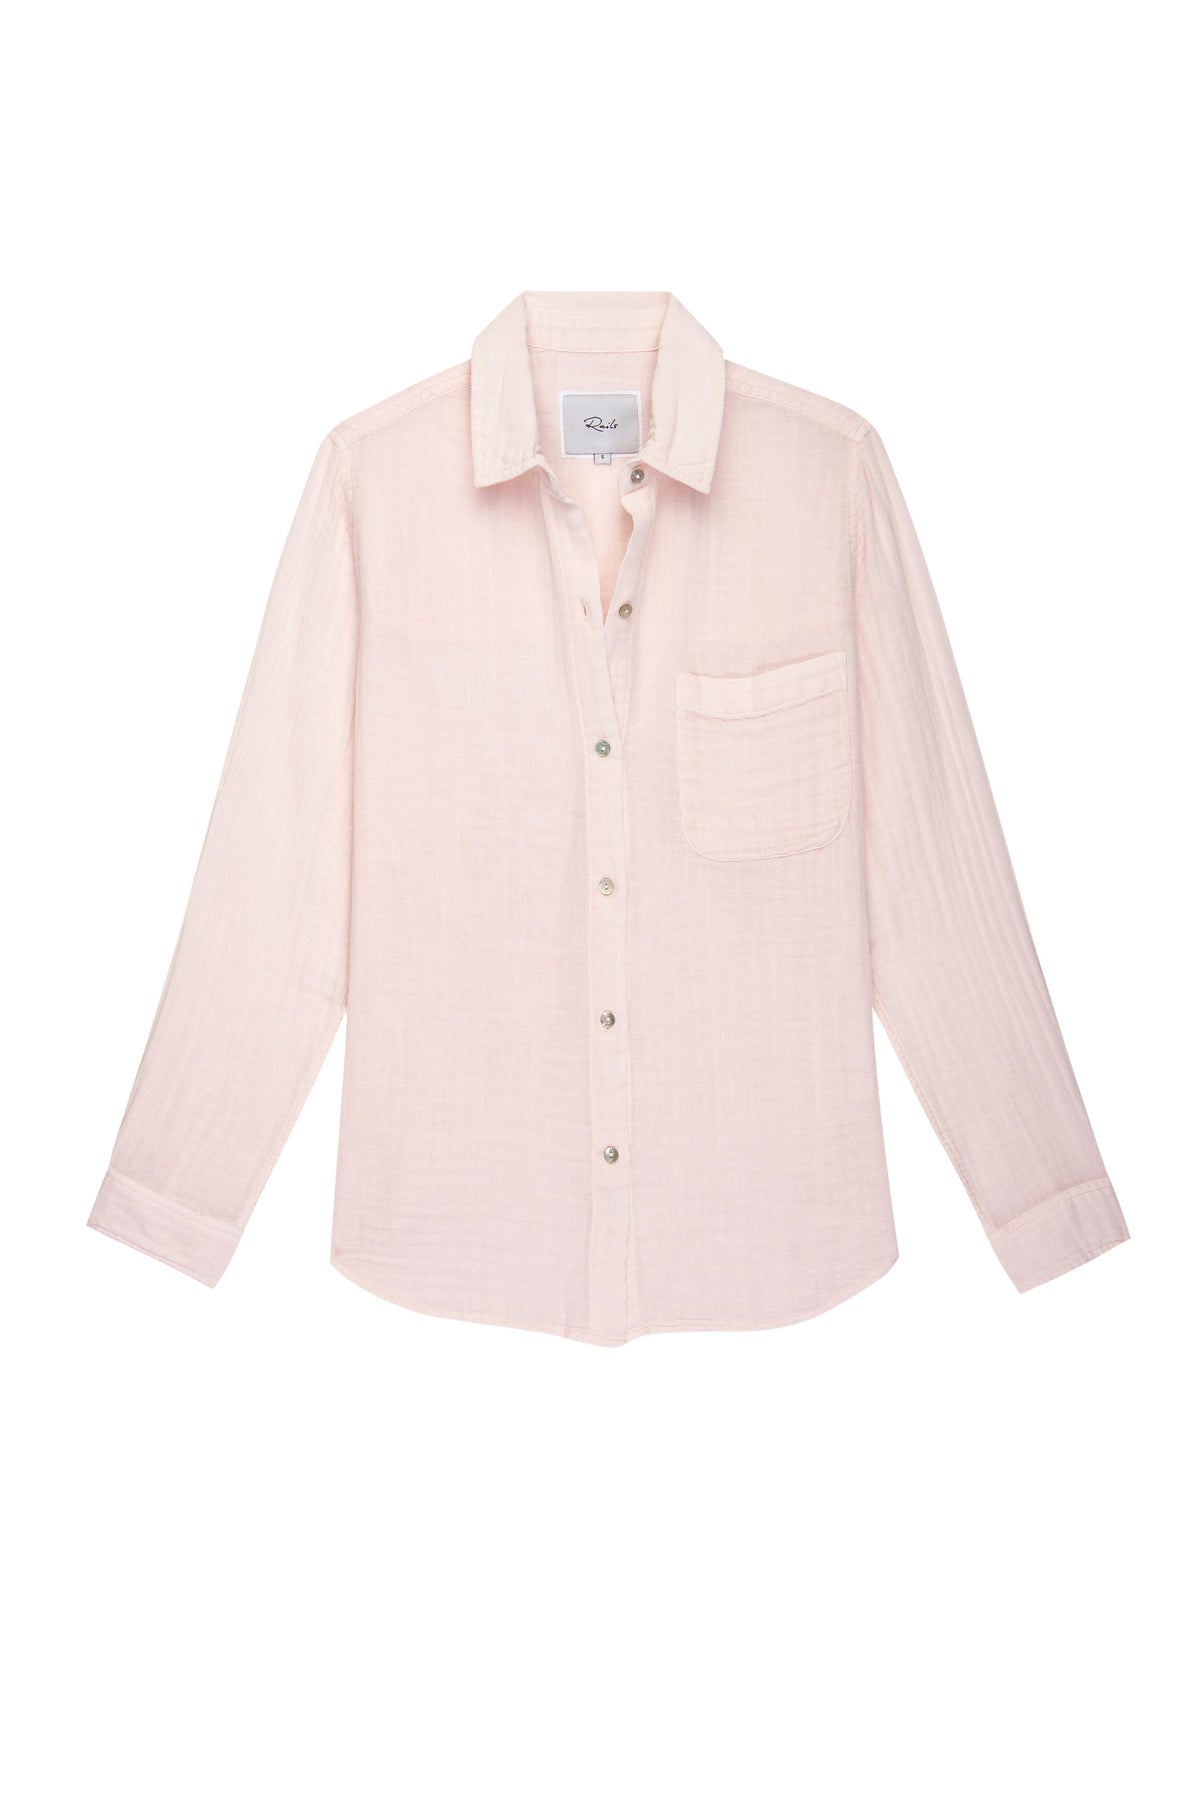 Pink cheesecloth long sleeved shirt